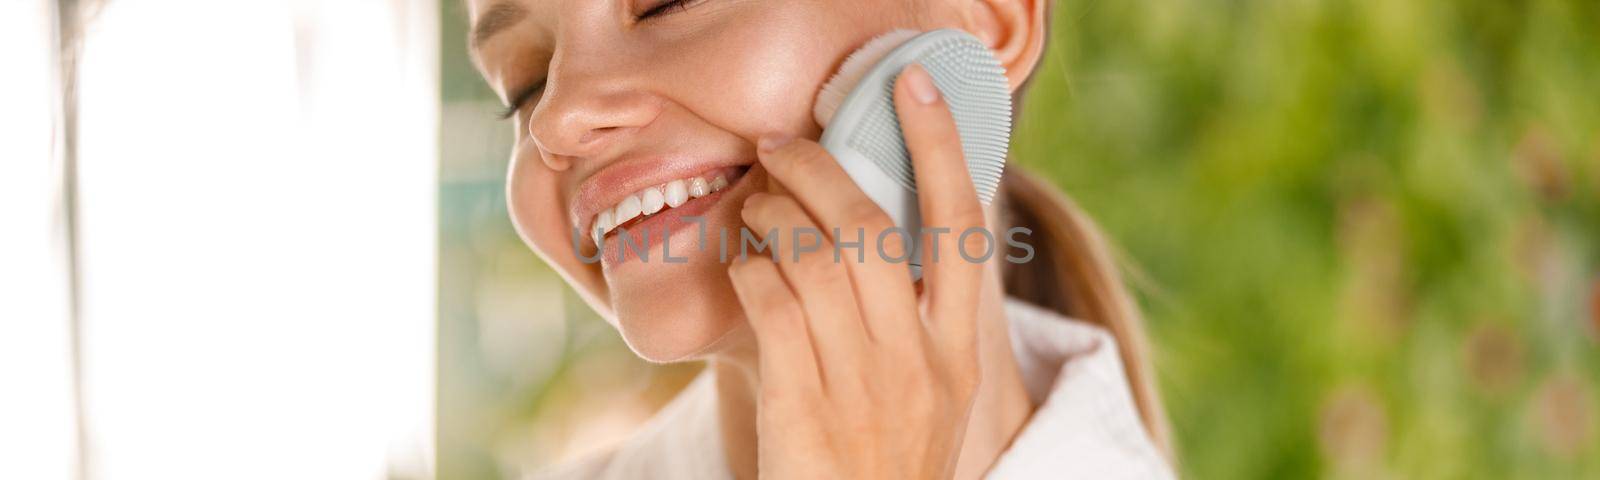 Cropped portrait of young woman wearing bathrobe smiling while using silicone face brush to cleanse skin by Yaroslav_astakhov